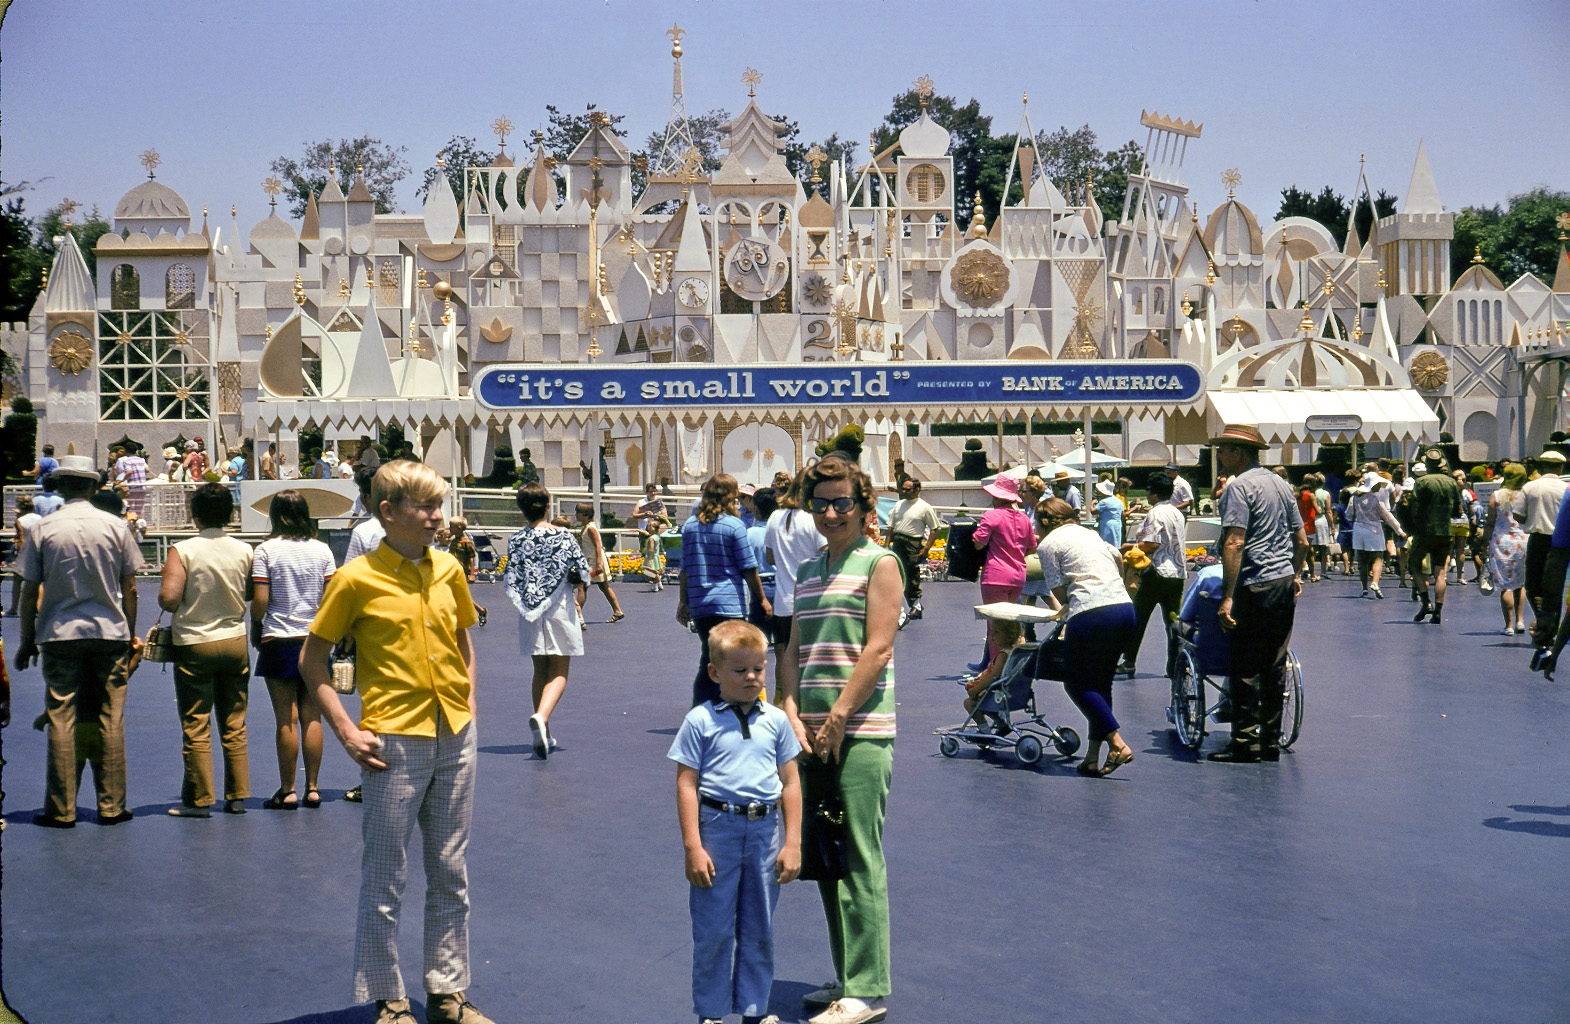 Return of the ill-tempered teen. I am actually wearing the same pants and shoes as in an earlier picture. Sometimes I'm surprised my parents didn't just dump me on some roadside back then. I wasn't a troublemaker, but I sure was a grouchy SOB! 

I like this picture for the background: Disneyland about 1968. There is a lot going on. Bank of America tried to promote some warm and fuzzy values by sponsoring the Small World ride. The effects of that, I will leave to the viewer's imagination.

My Dad took the picture, as usual. There's little brother and my Mom is still alive and kicking at age 83. View full size.